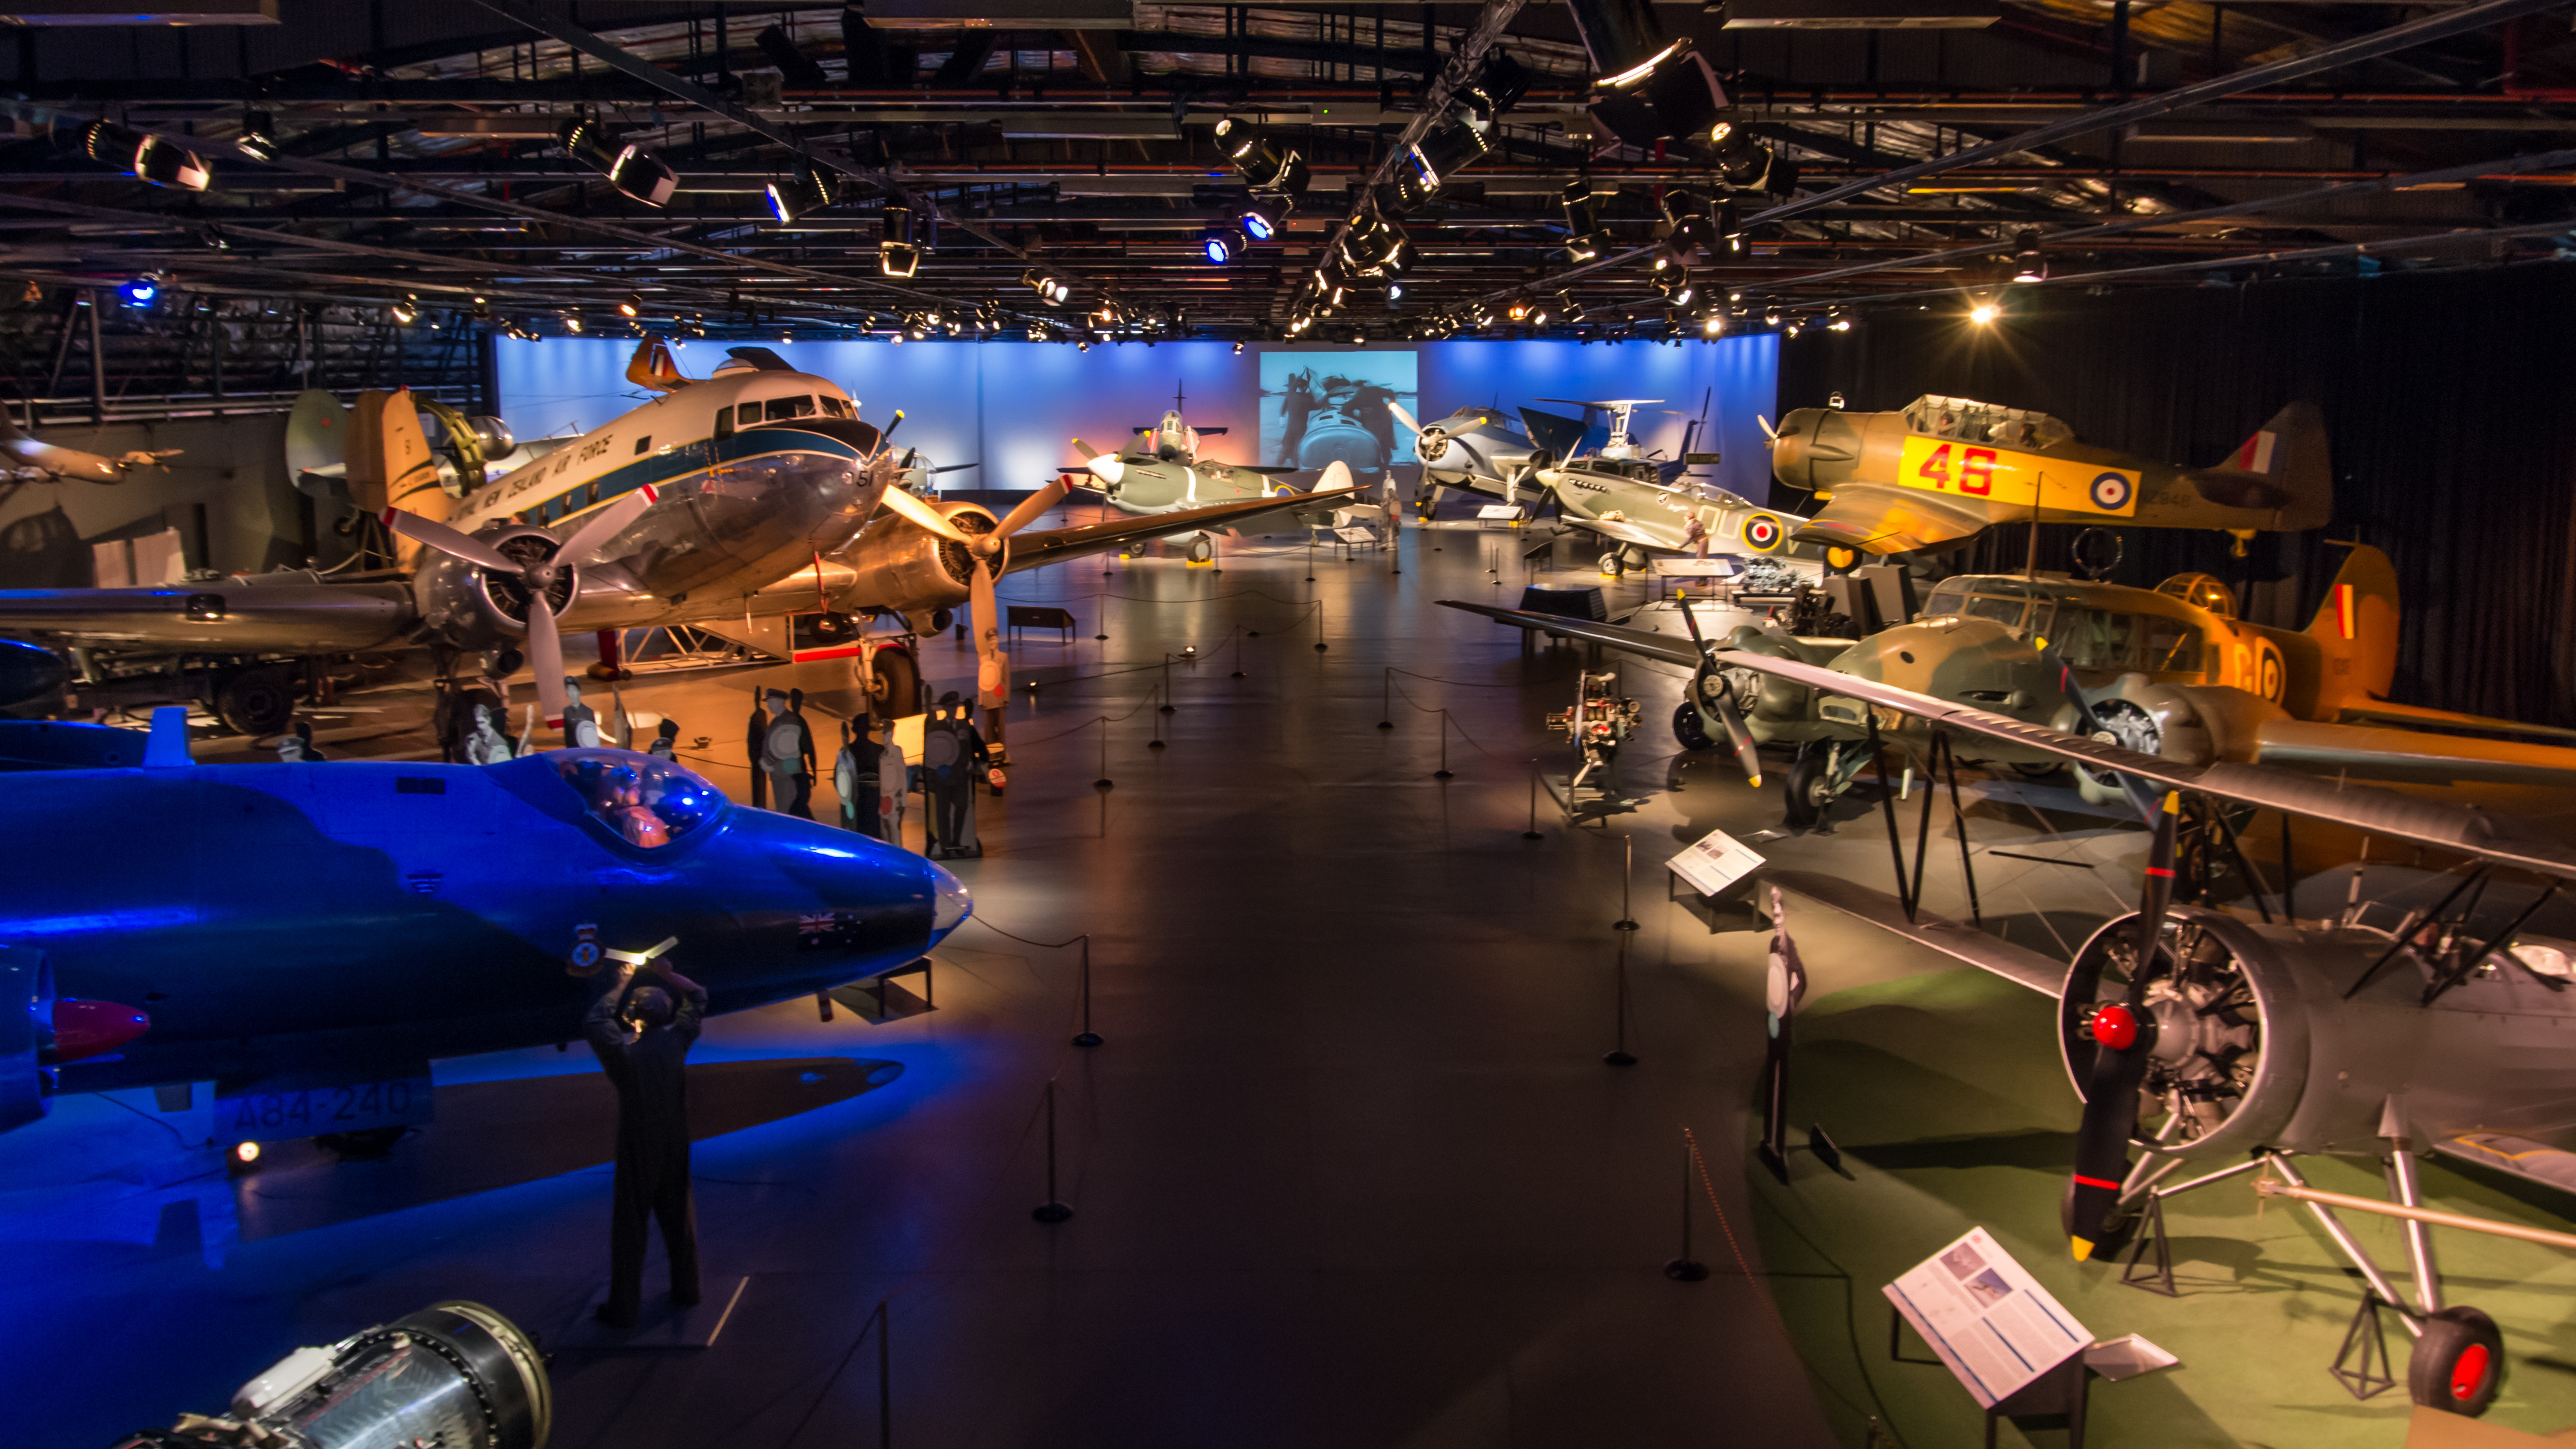 Air Force Museum of New Zealand